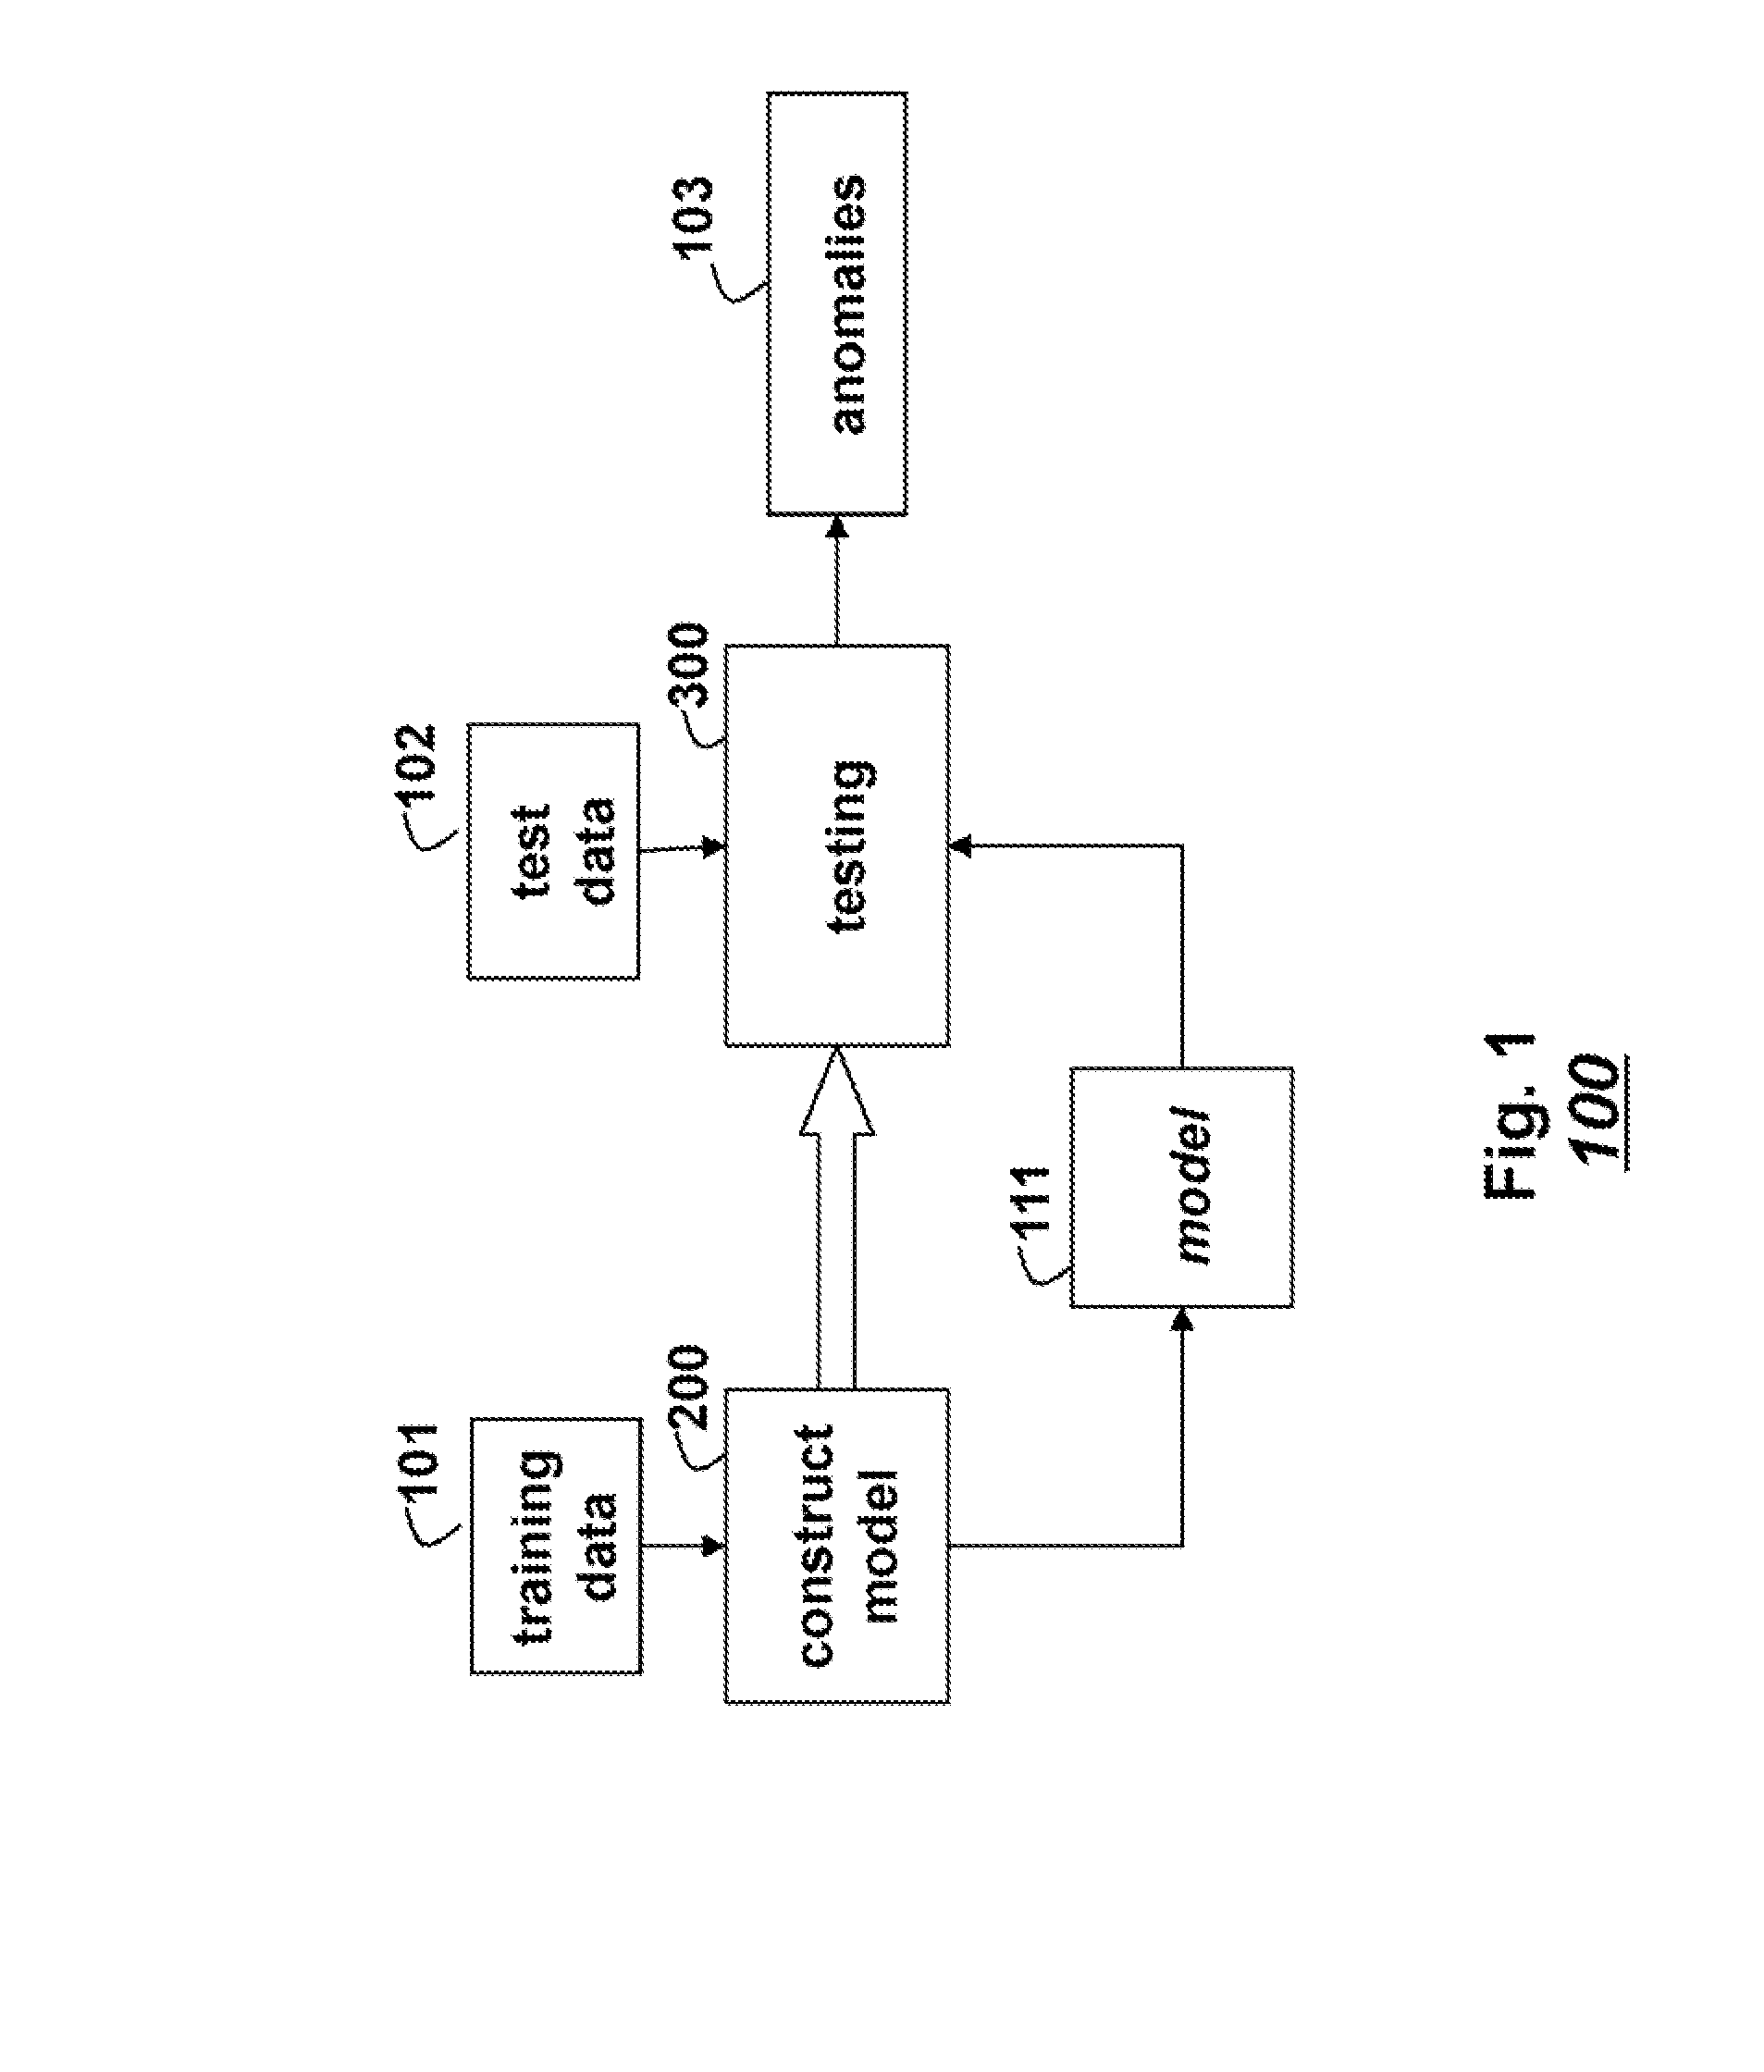 Method for Detecting Anomalies in Multivariate Time Series Data